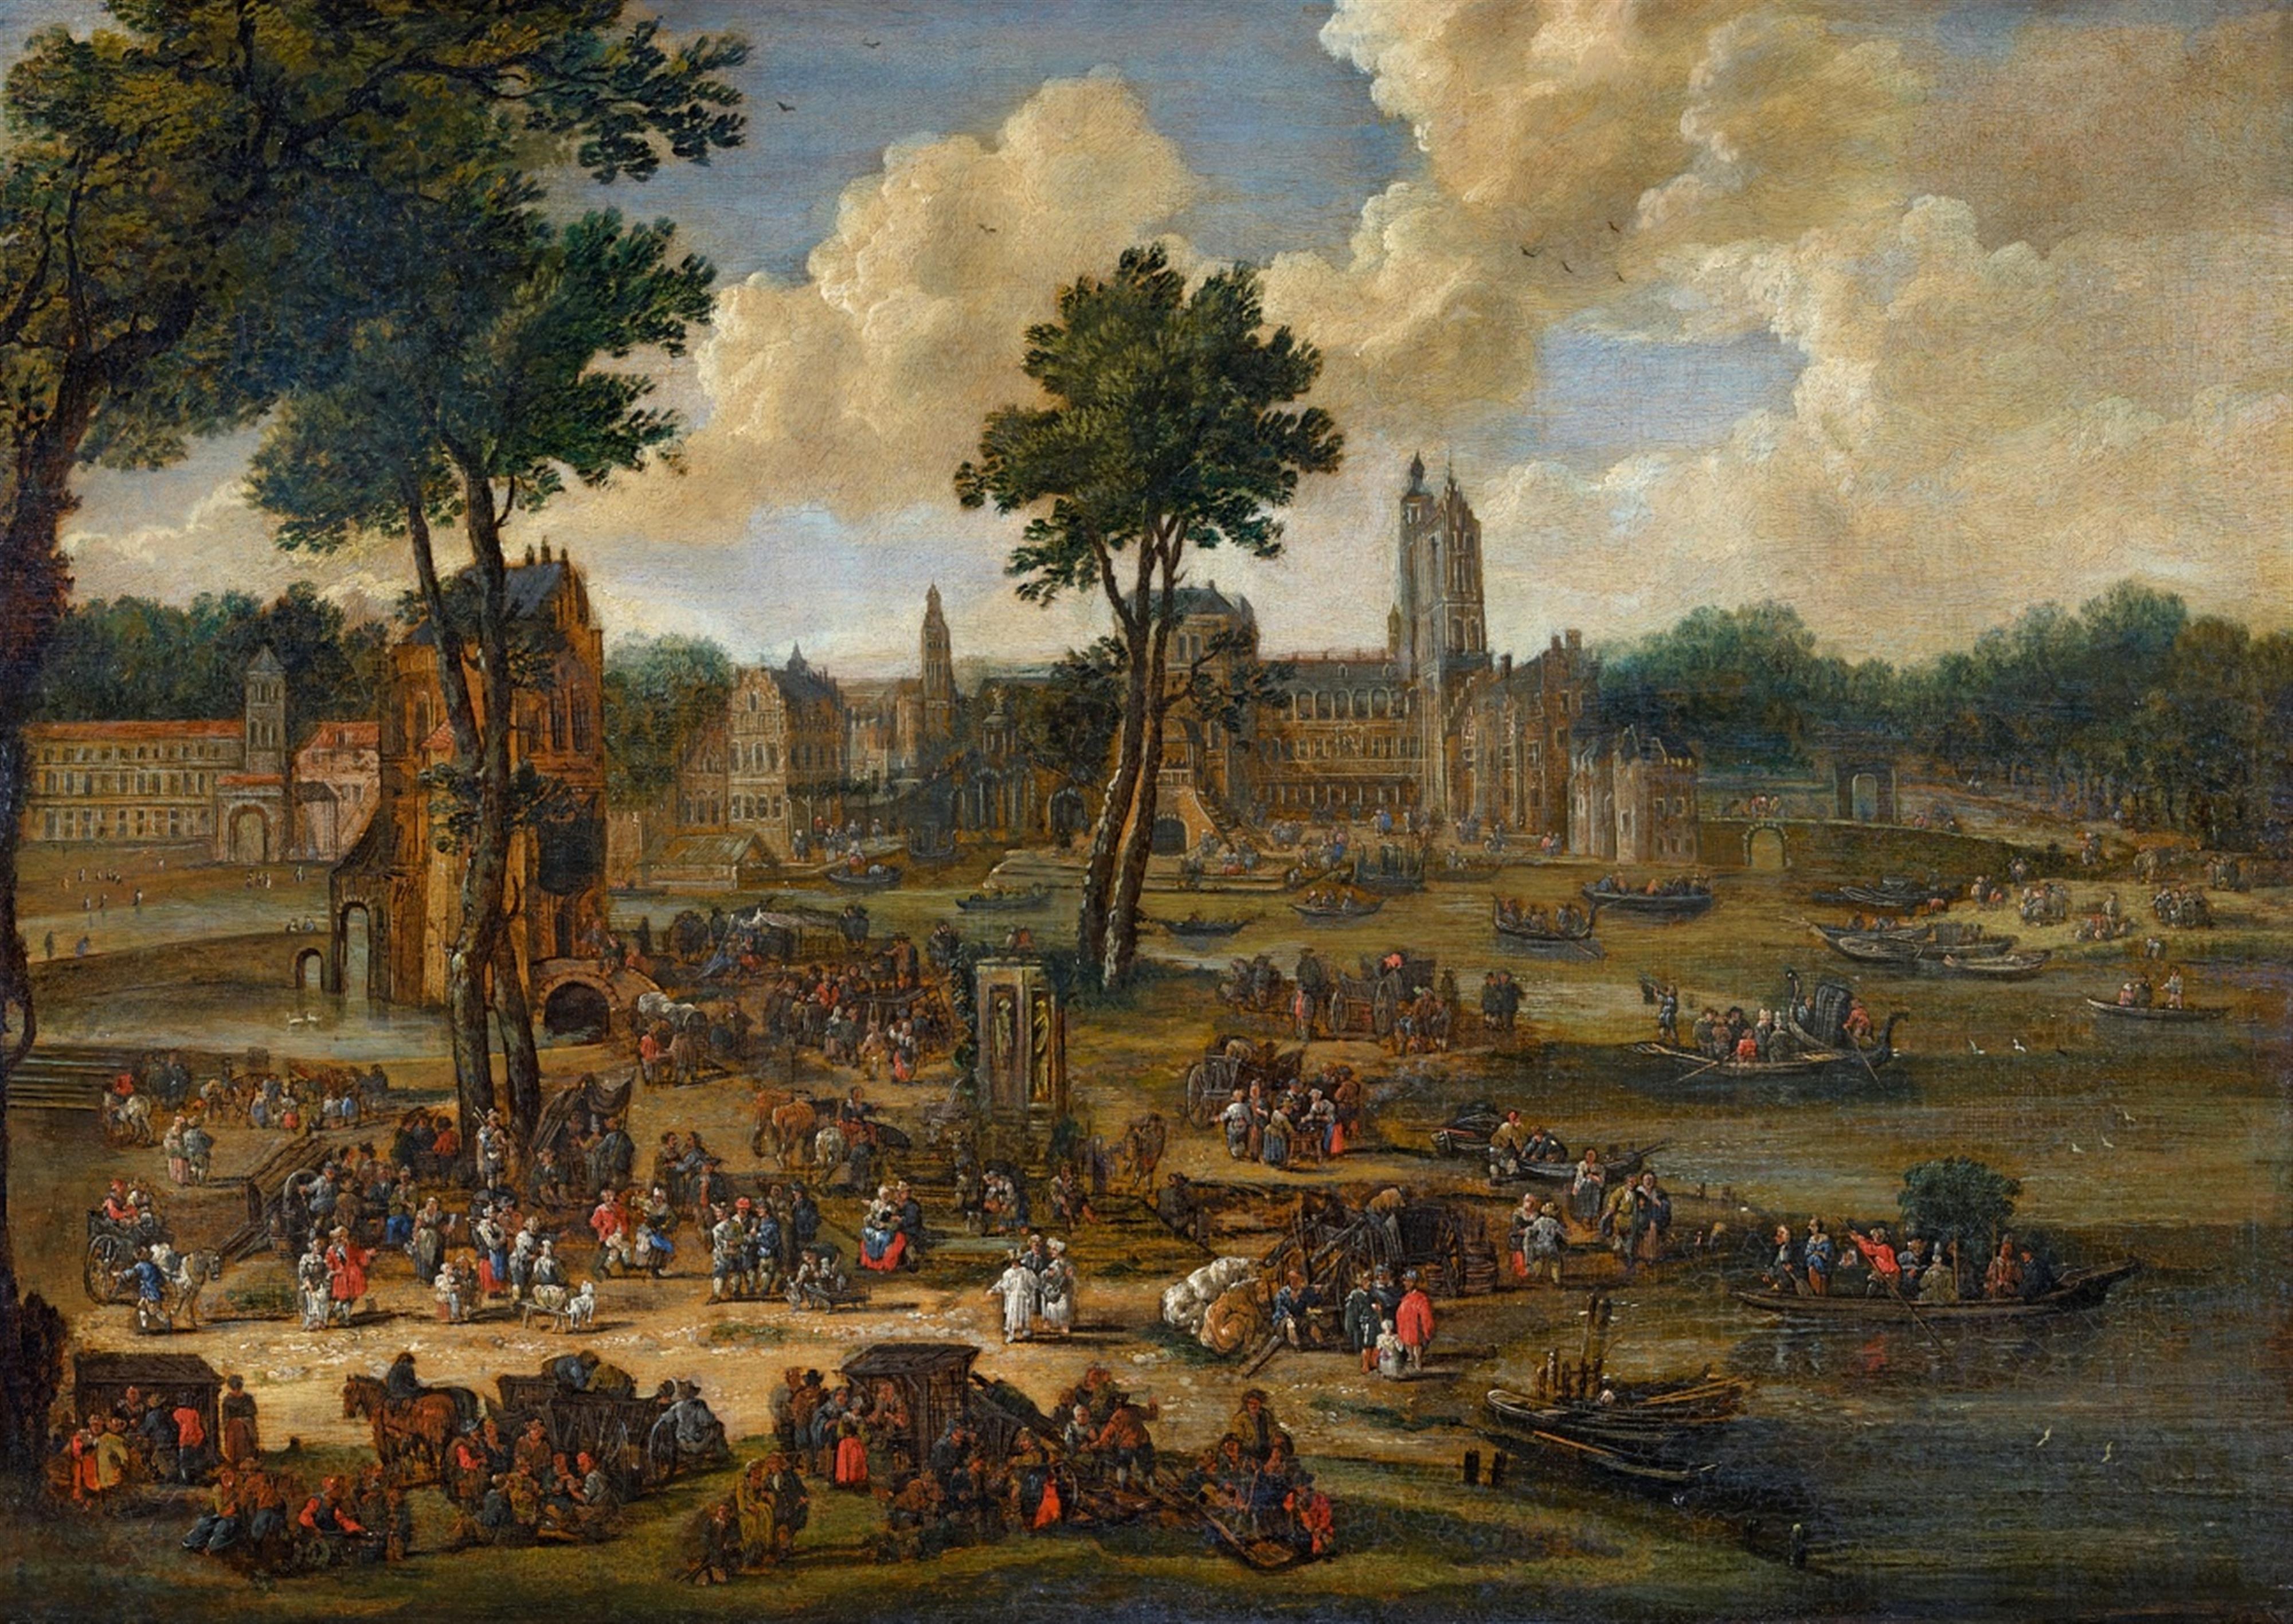 Pieter Casteels - Market Scene in an Architectural Setting - image-1